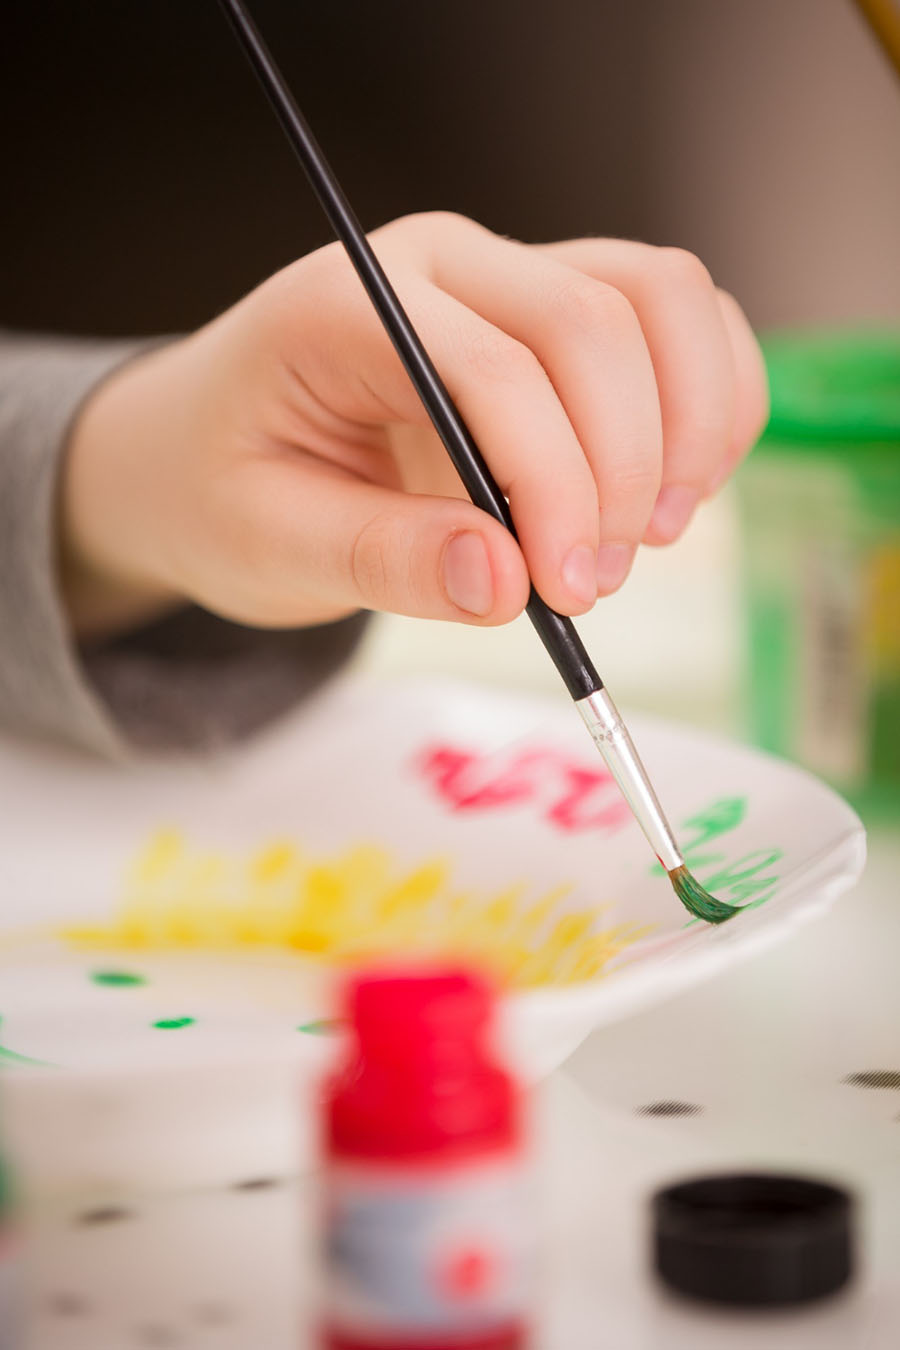 Small child sitting at a table painting a plate